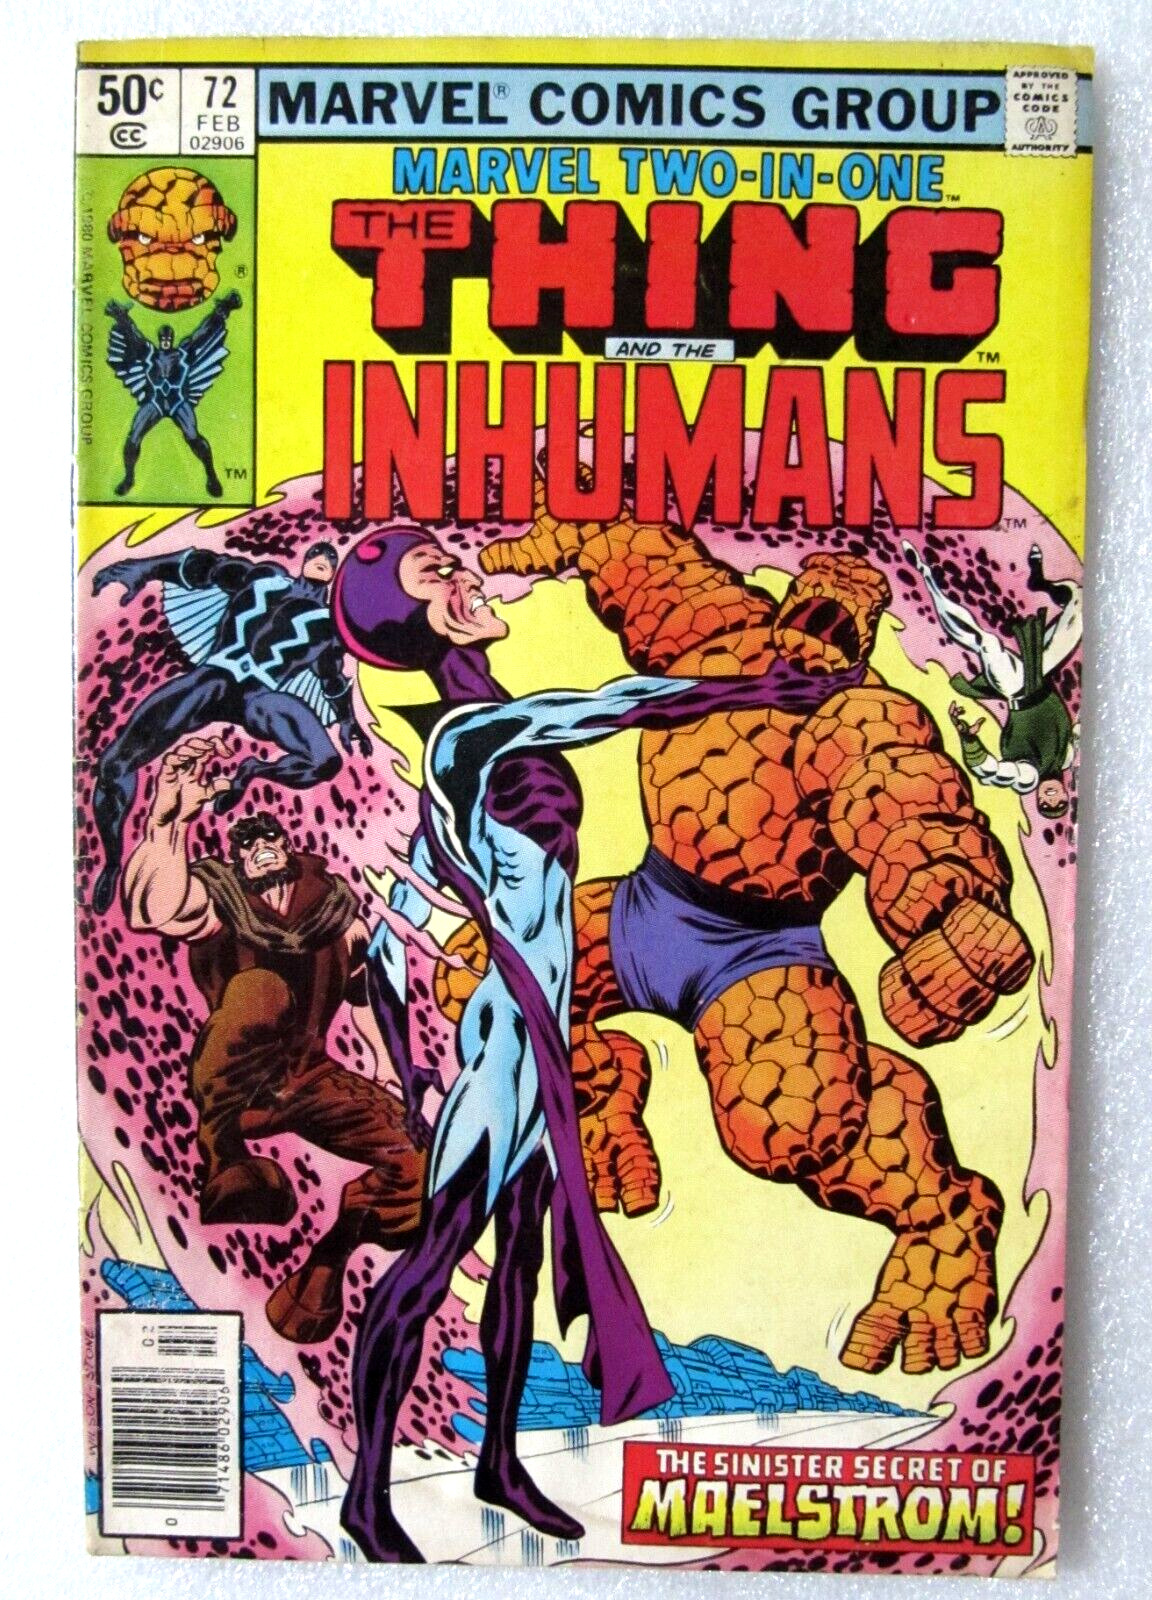 MARVEL TWO IN ONE #72 1980 COMIC THING &THE INHUMAN - DEATHURGE - RON WILSON